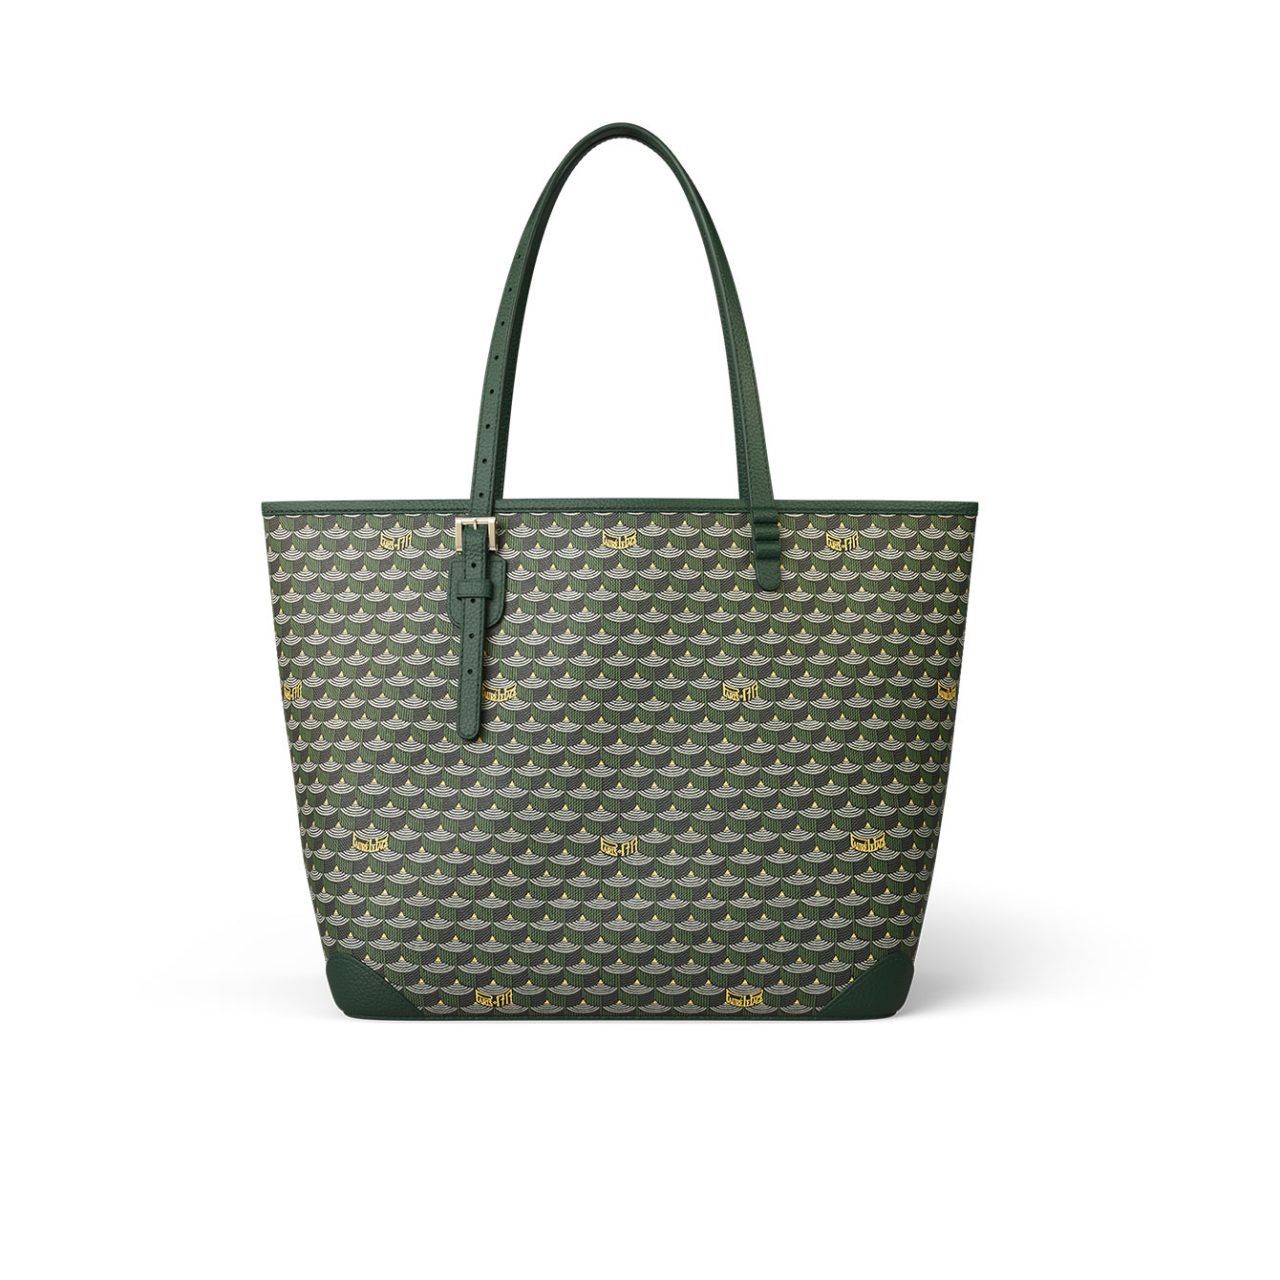 My Top 5 Monogram Canvas Shopping Totes 